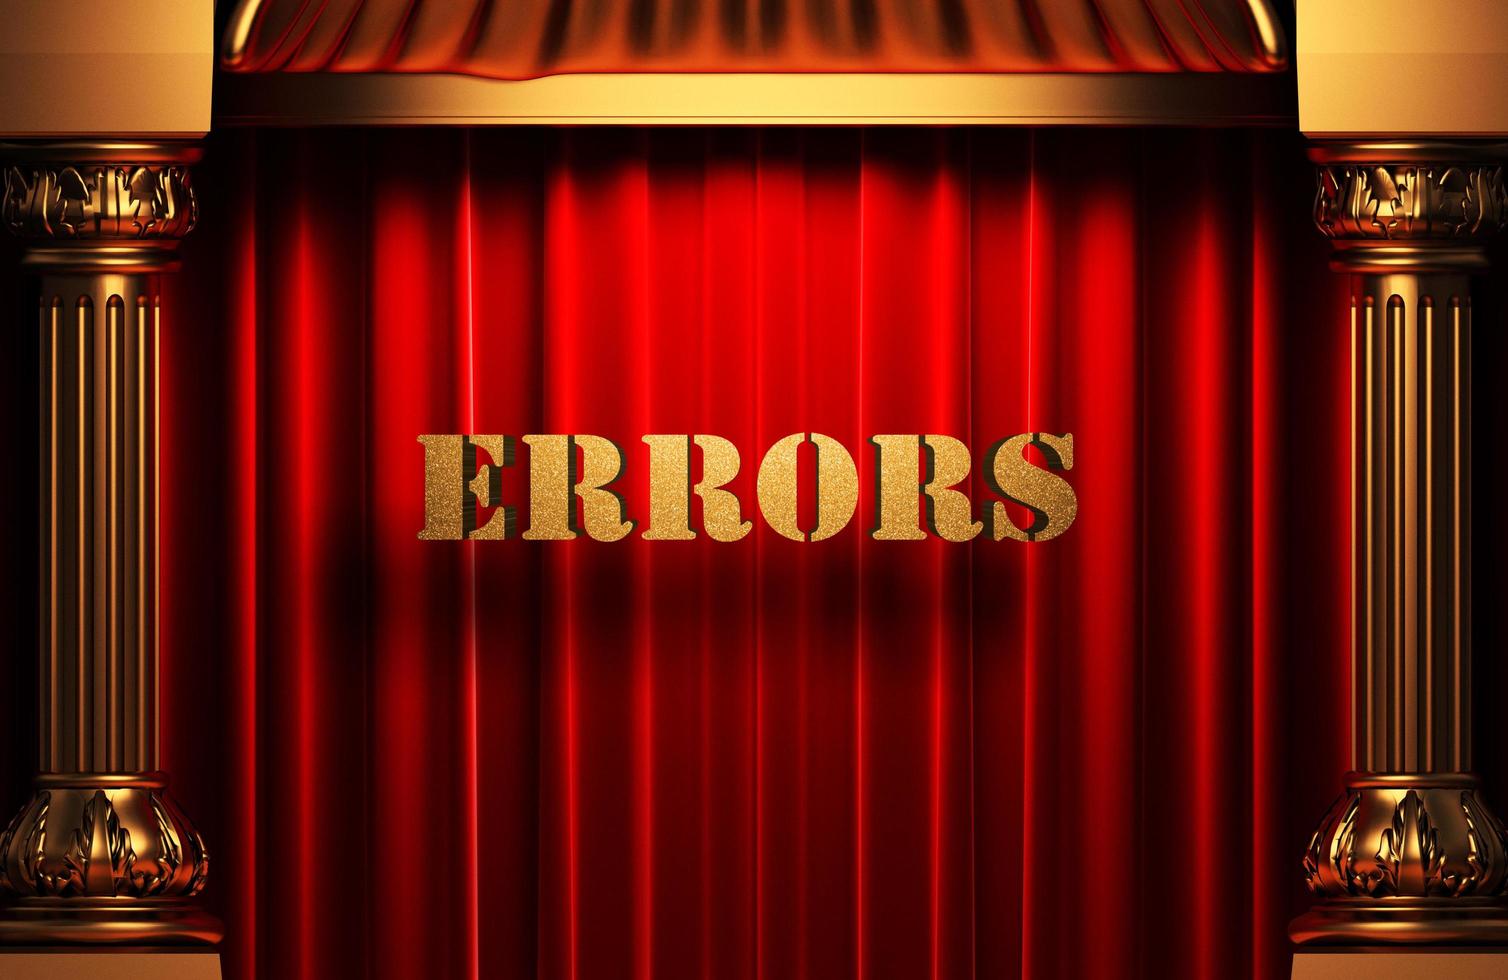 errors golden word on red curtain photo